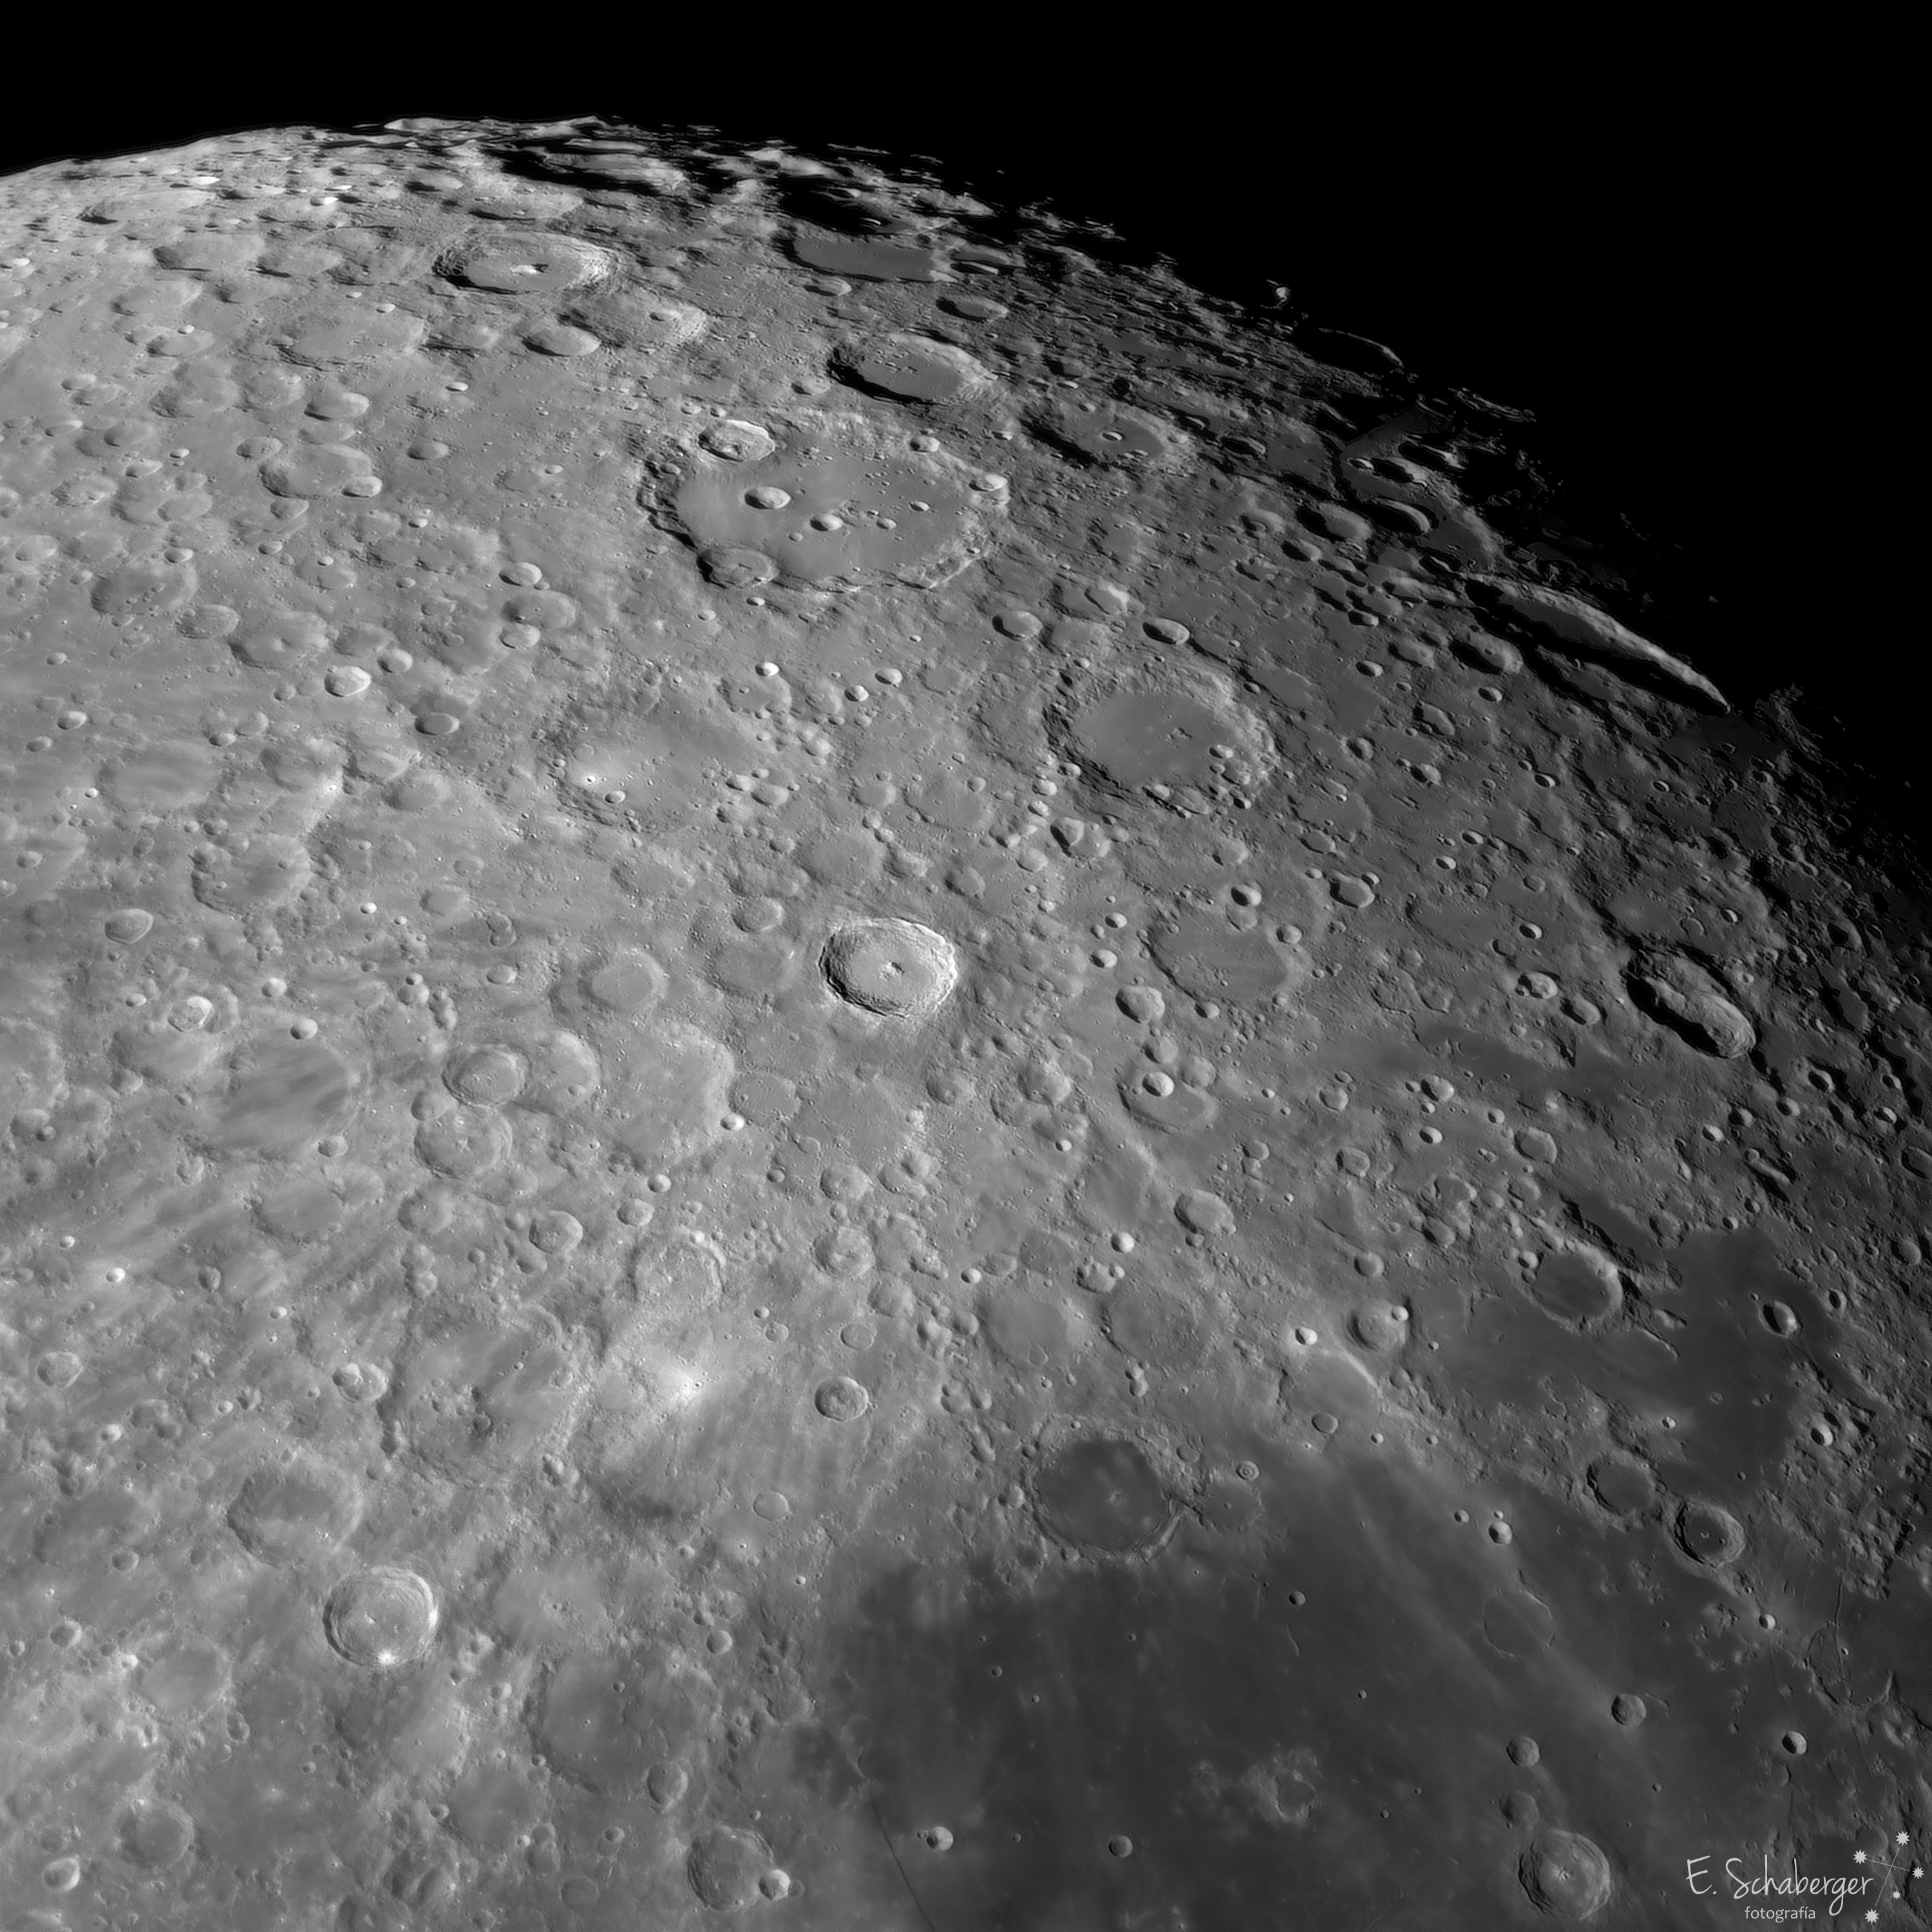 APOD: 2021 August 5 - Tycho and Clavius